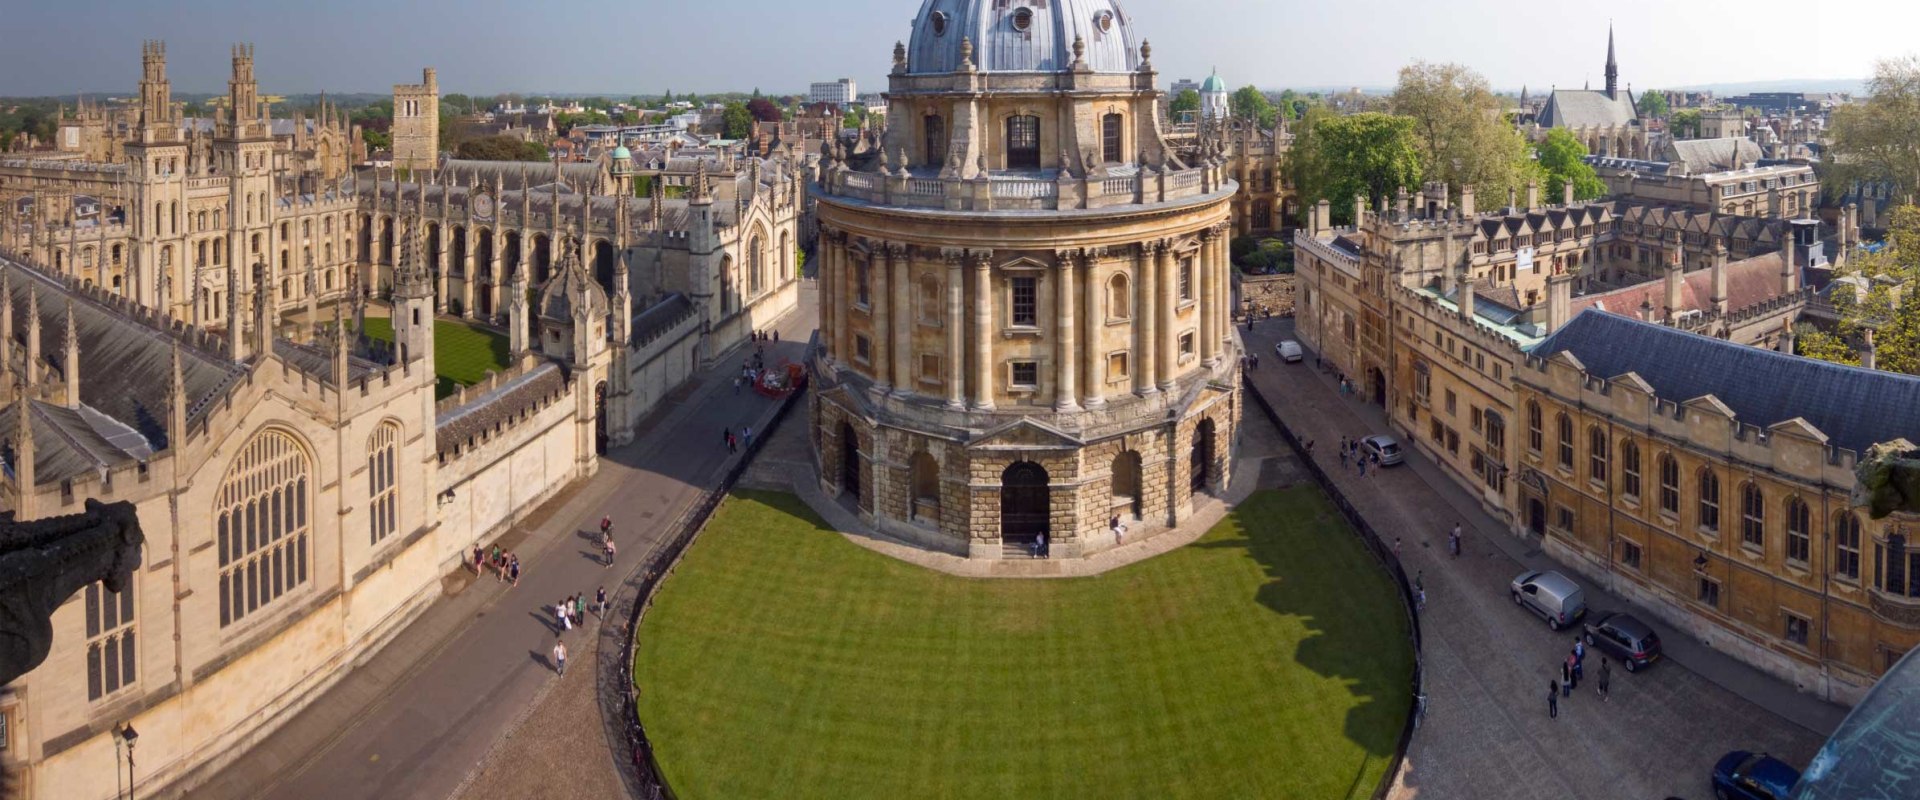 Scheduling and Booking Maths Tuition in Oxford